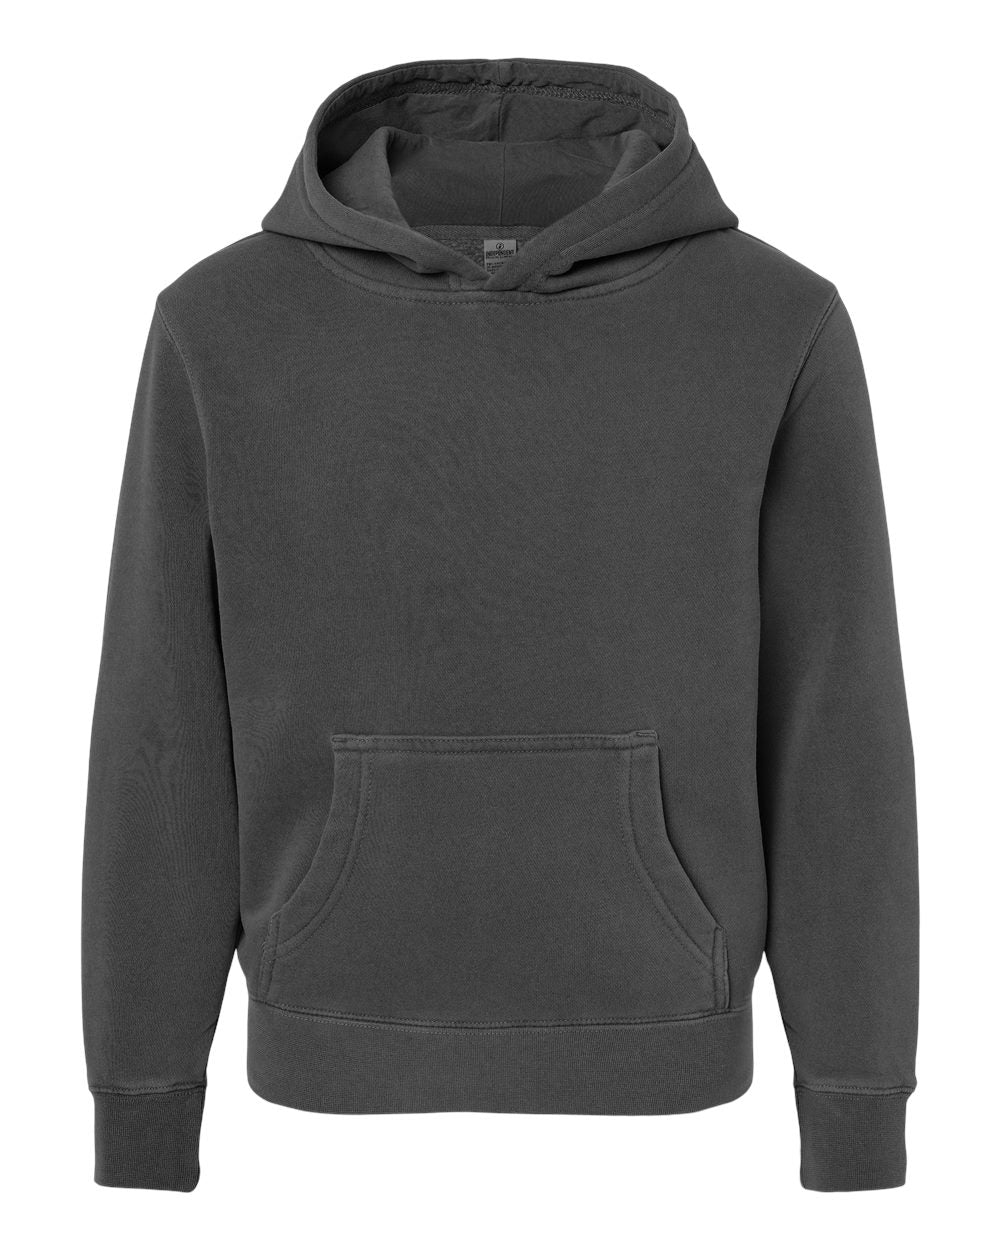 Midweight Pigment-Dyed Hooded Youth Sweatshirt - Independent Trading Co. PRM1500Y